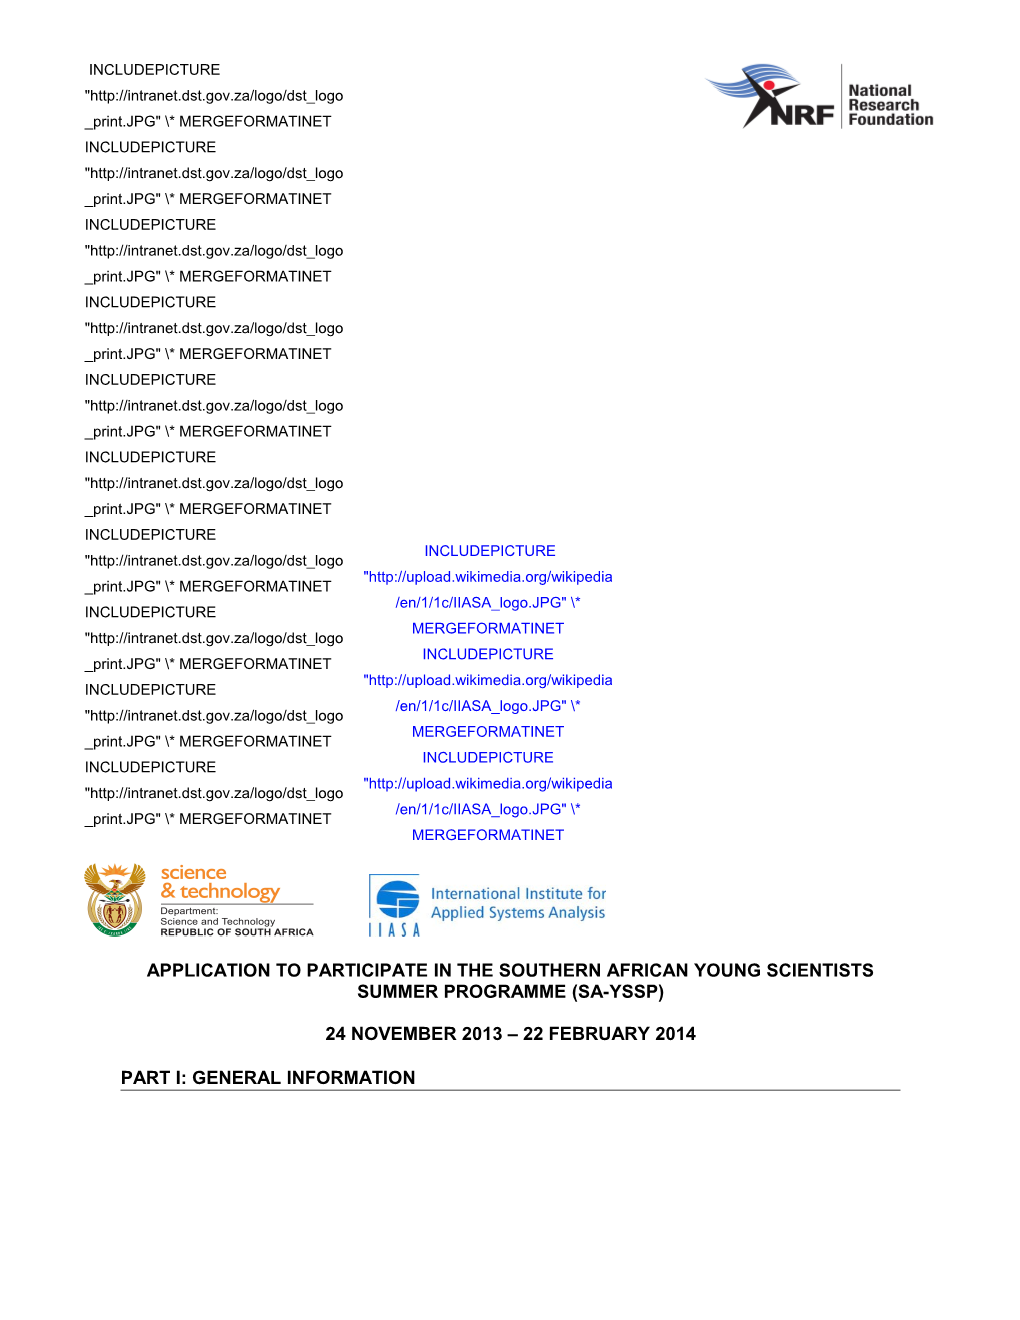 Application to Serve As Supervisor at the Southern African Young Scientists Summer Programme